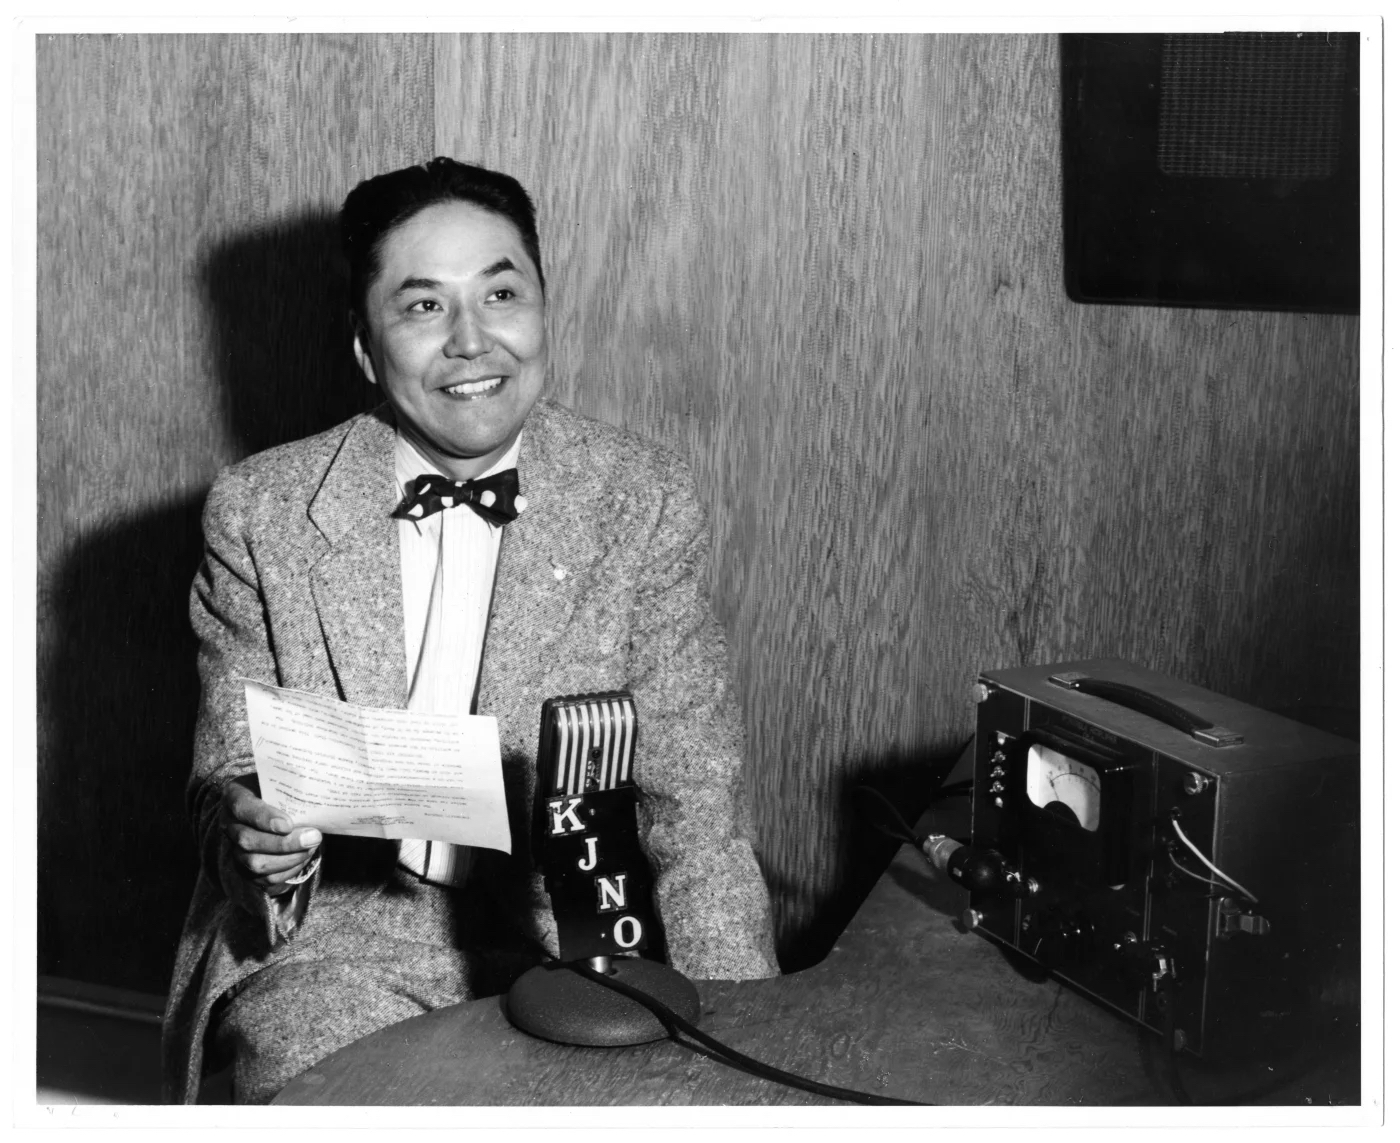 a black and white photo of a man preparing to go on the radio